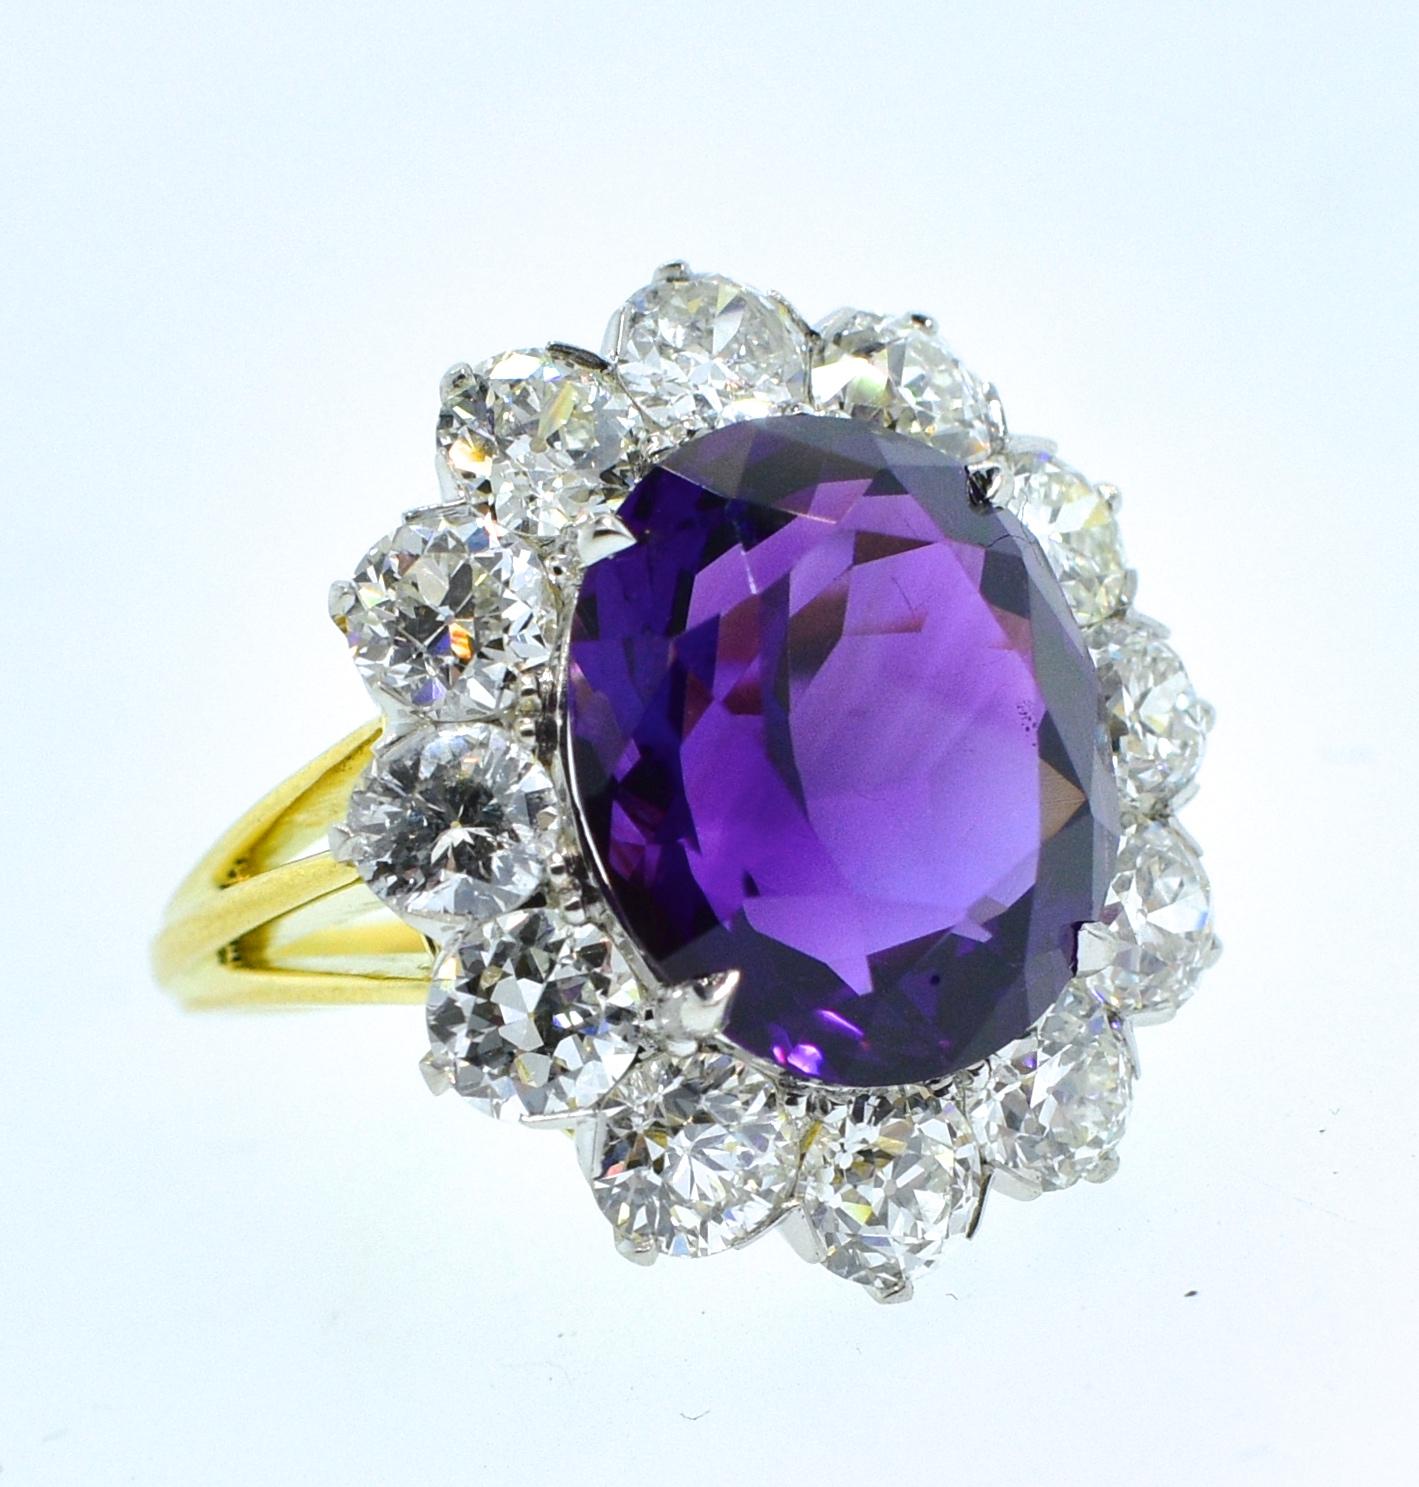 Antique diamond ring centering a fine vivid deep purple natural amethyst (probably from Siberia)weighing 7 cts. and surrounded by fine white old cut diamonds.  The diamonds are well cut and well match, near colorless, (H) and very slightly included